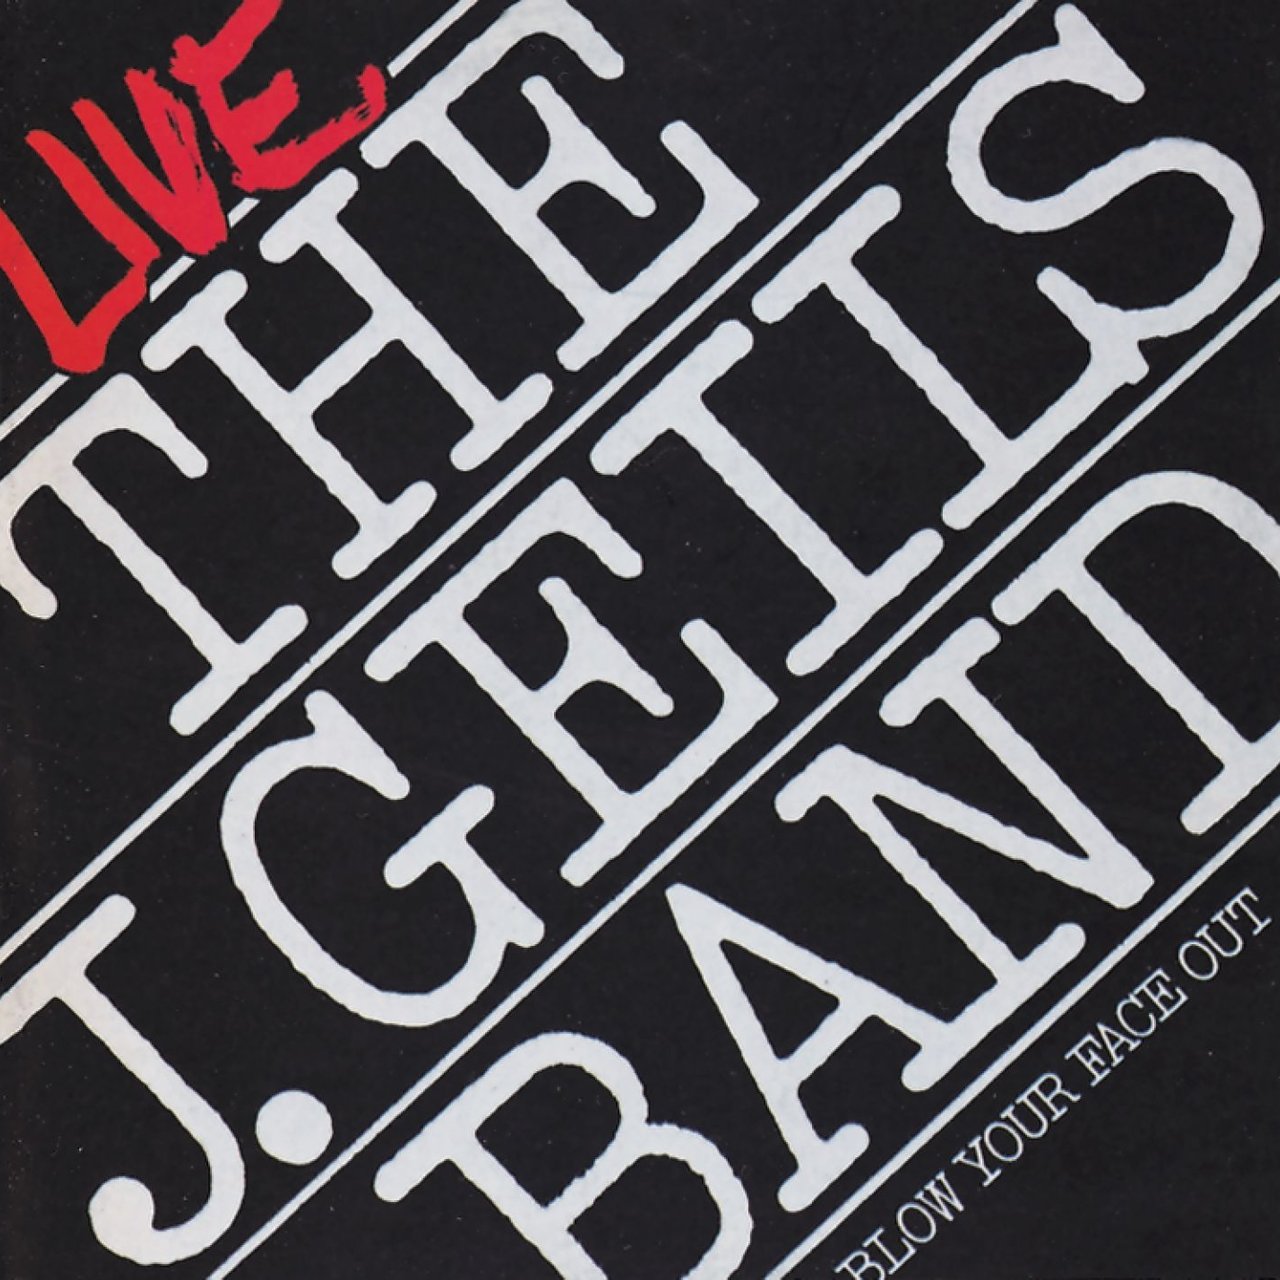 The J. Geils Band - Live- Blow Your Face Out [1976]